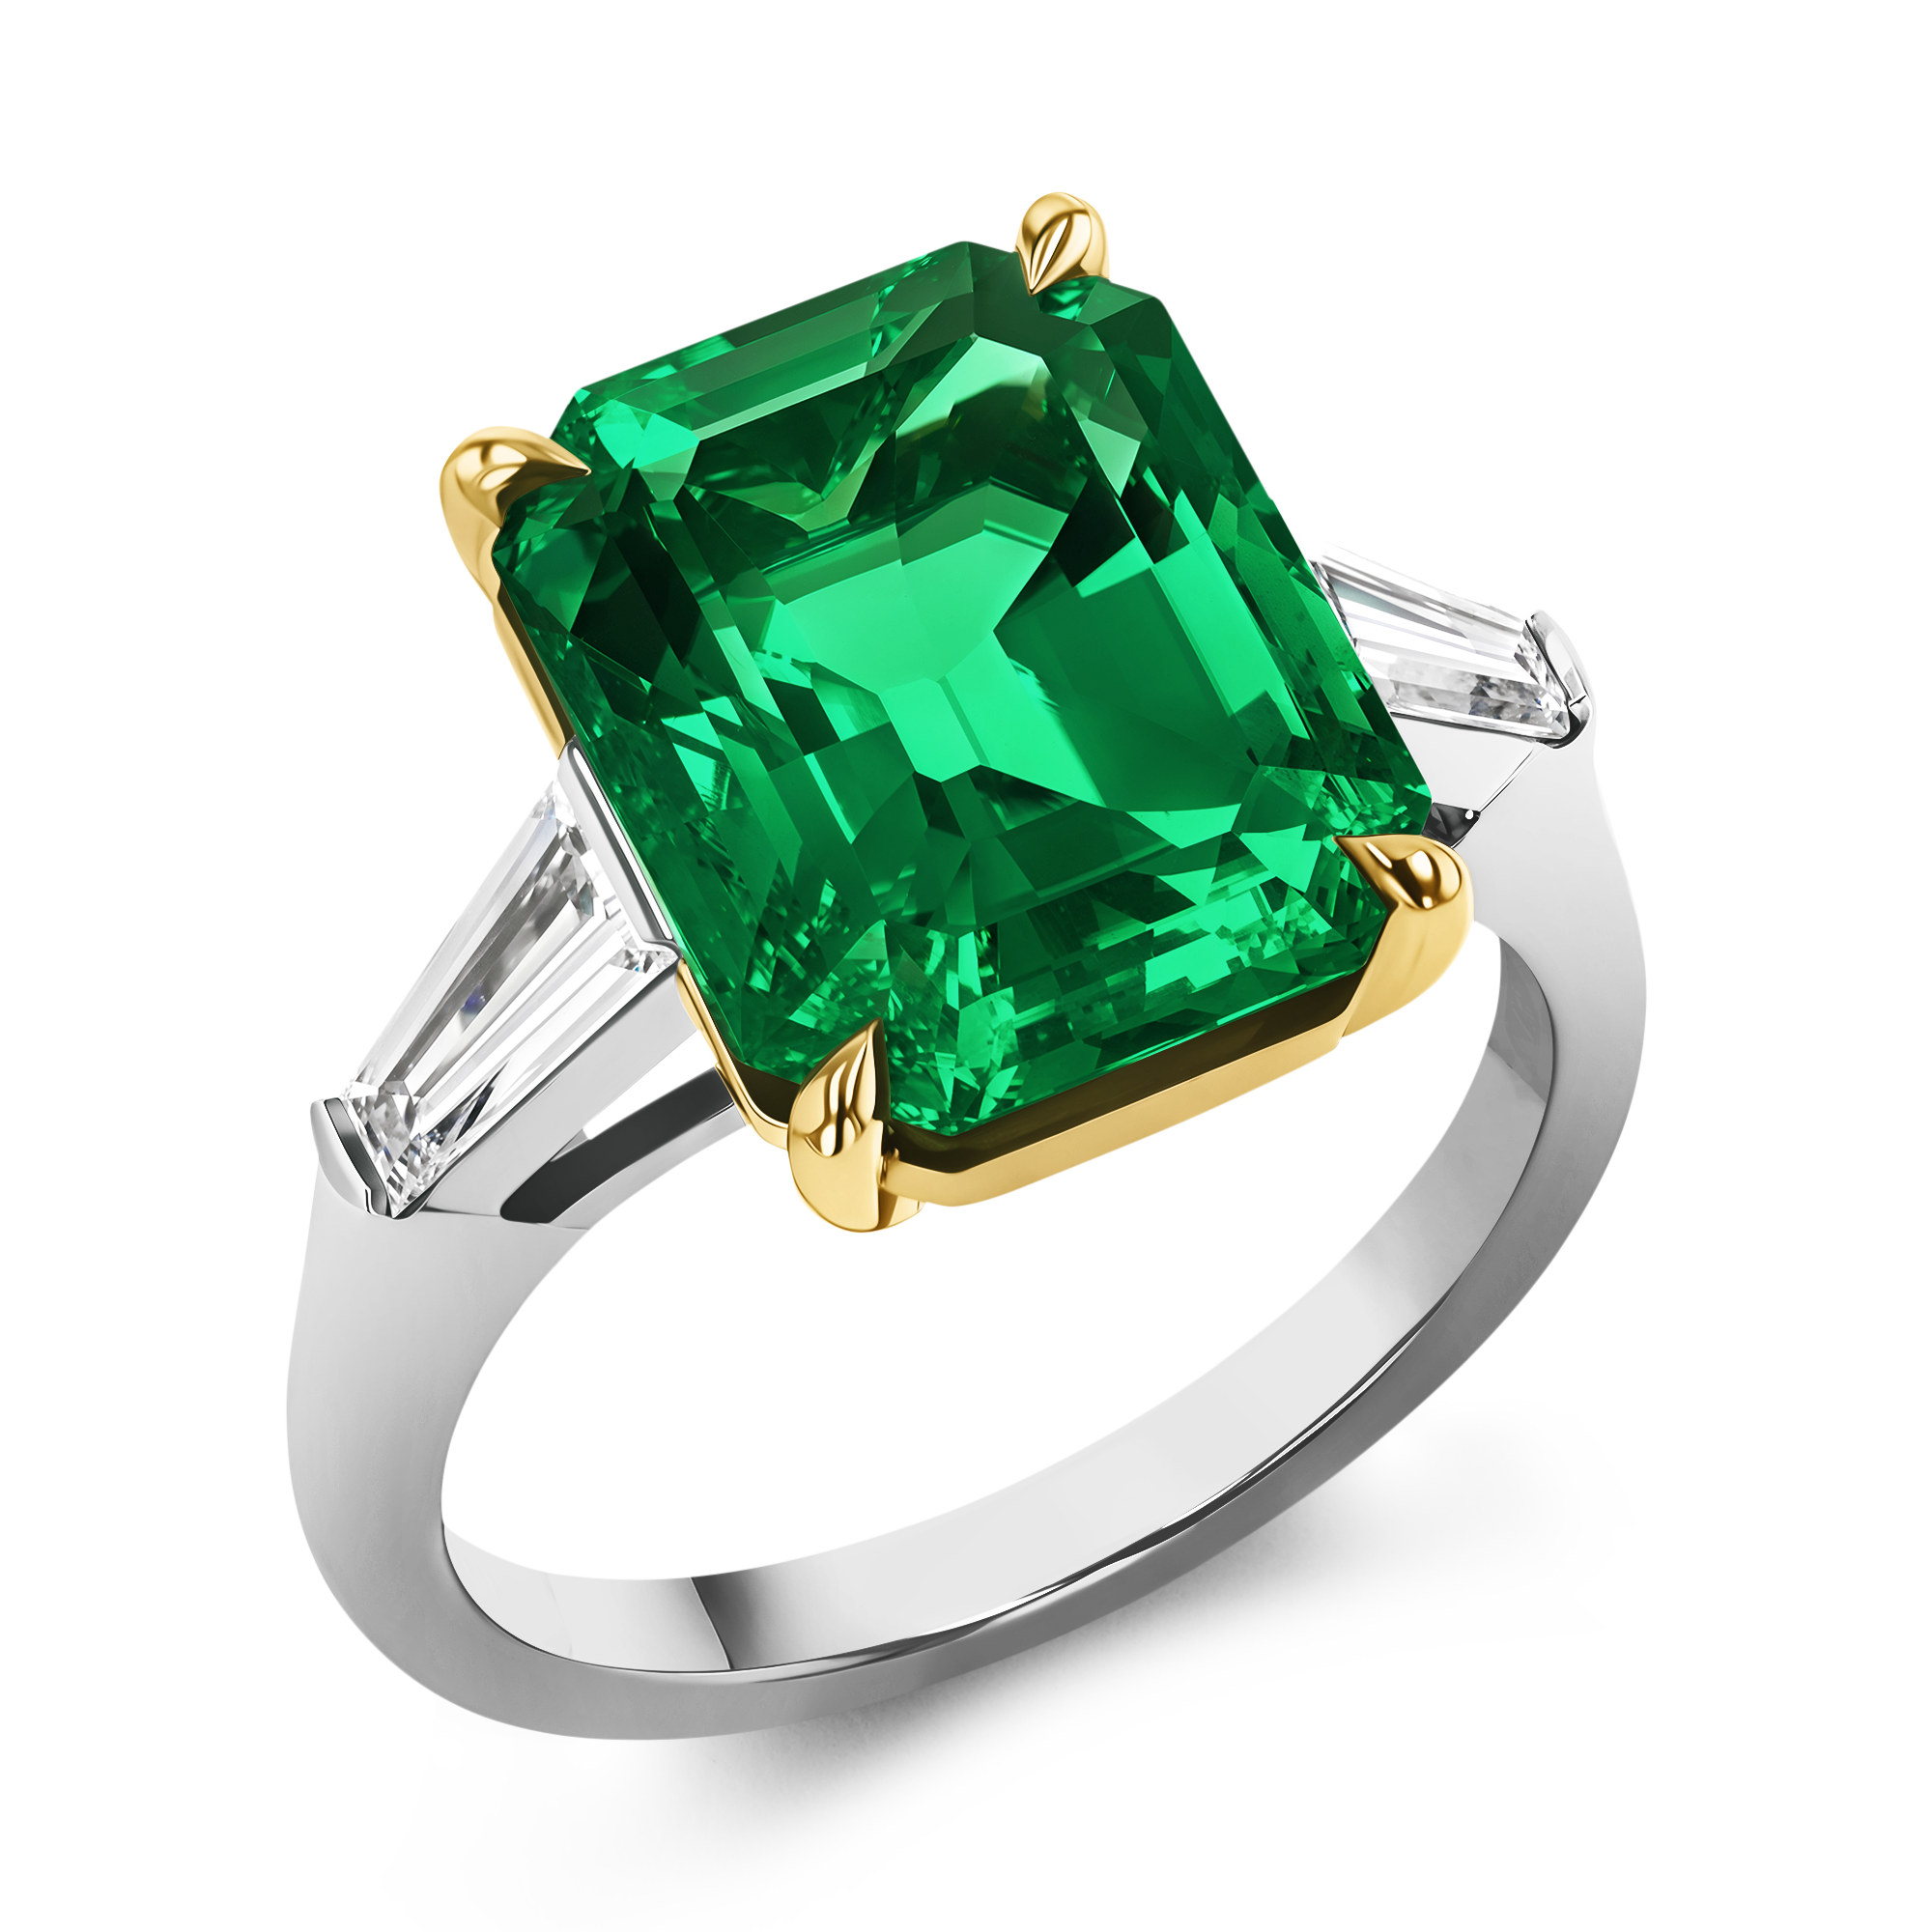 Masterpiece Octagonal Cut Colombian Emerald Ring Octagonal, Trapeze & Baguette Cut, Claw & Rub Over Set_1